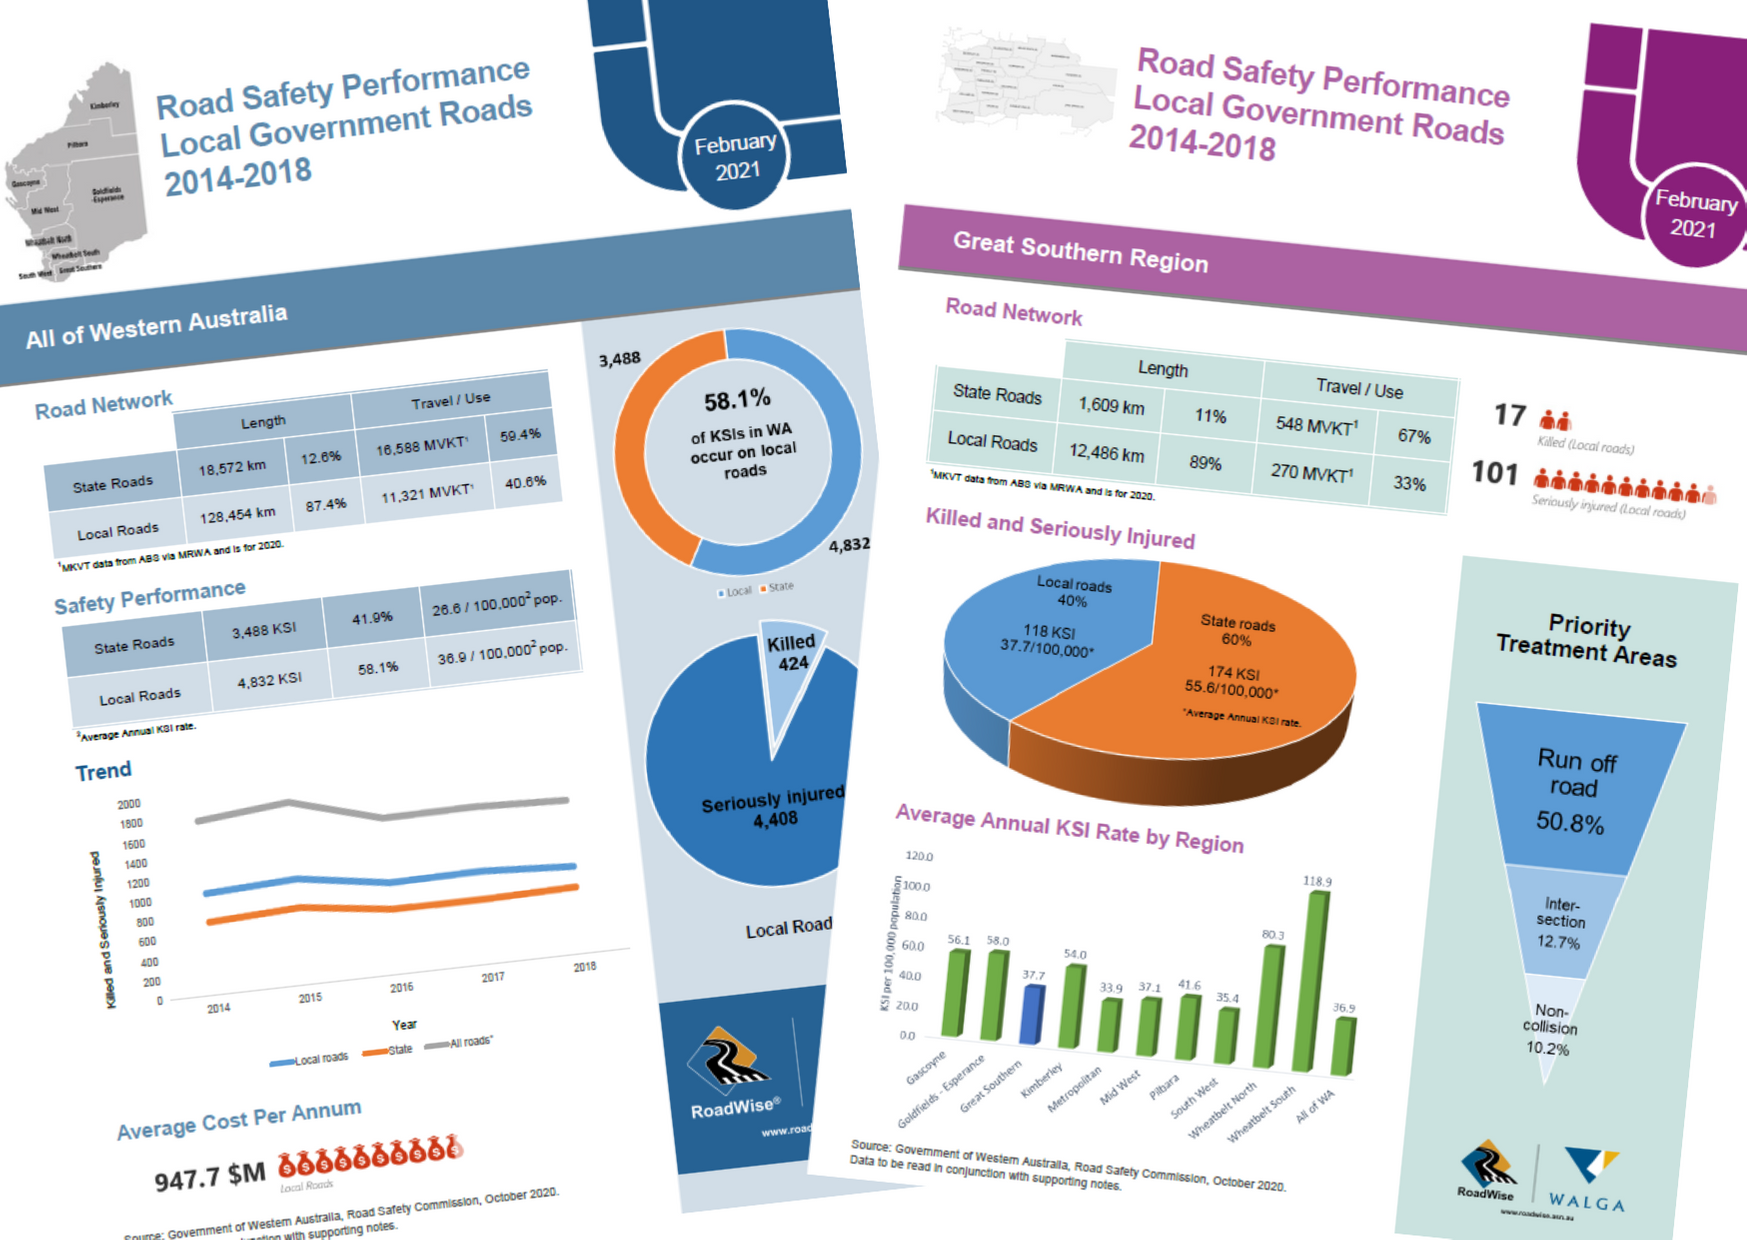 Road Safety Performance Reports